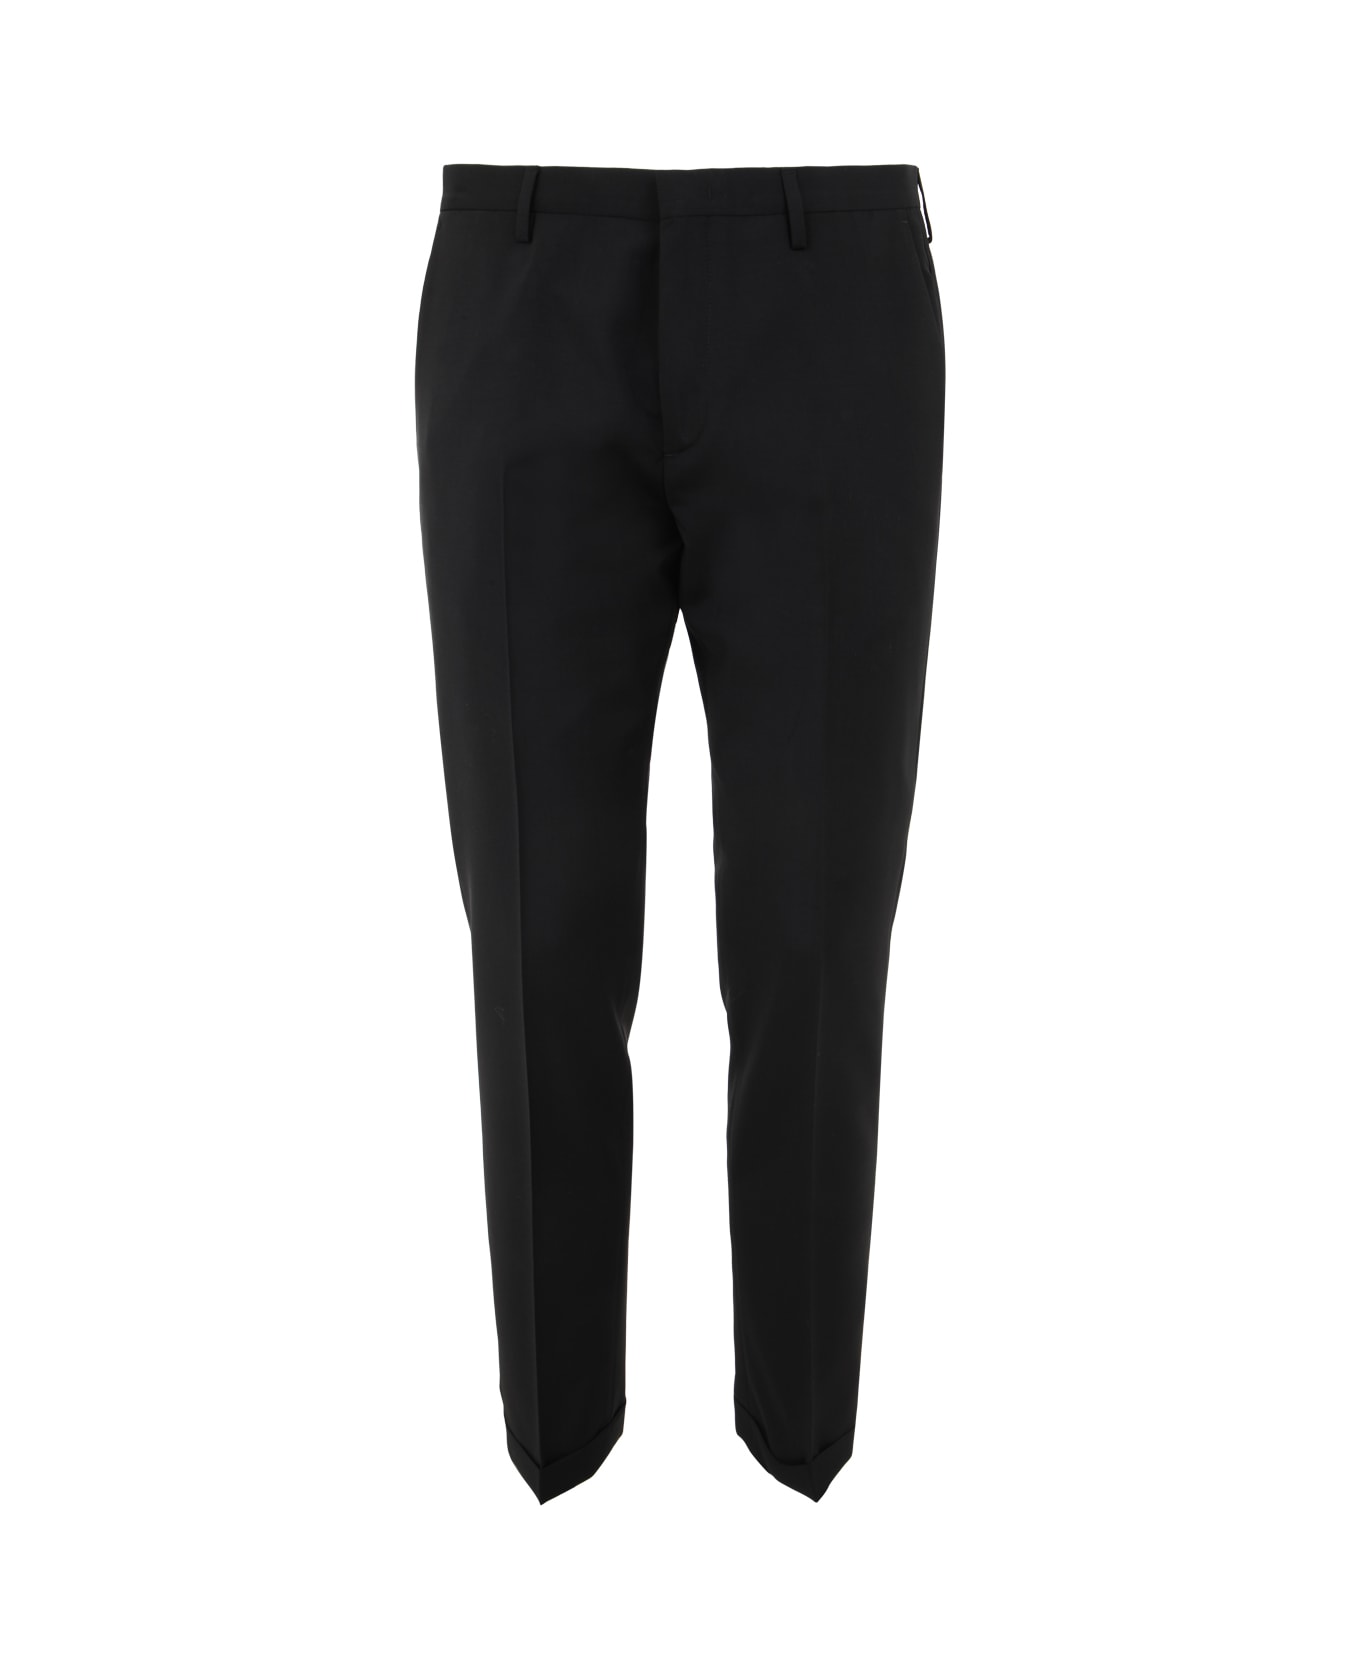 Paul Smith Mens Trousers - Black